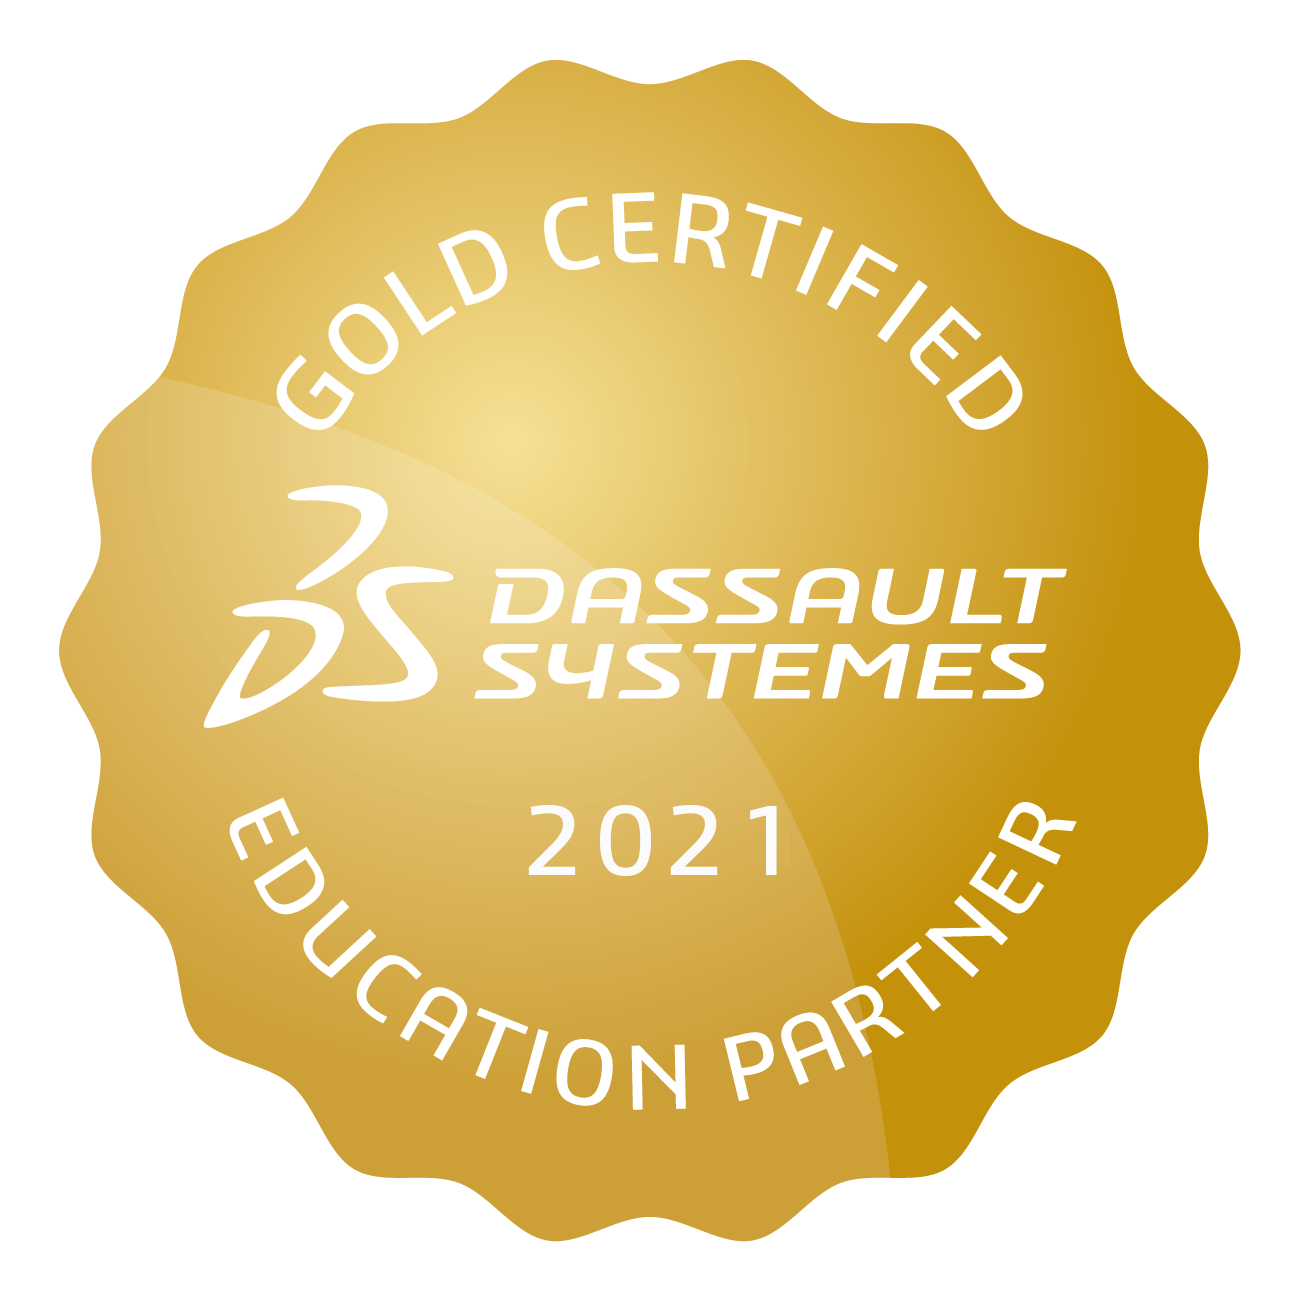 Dassault Systems Gold Certified Education Partner